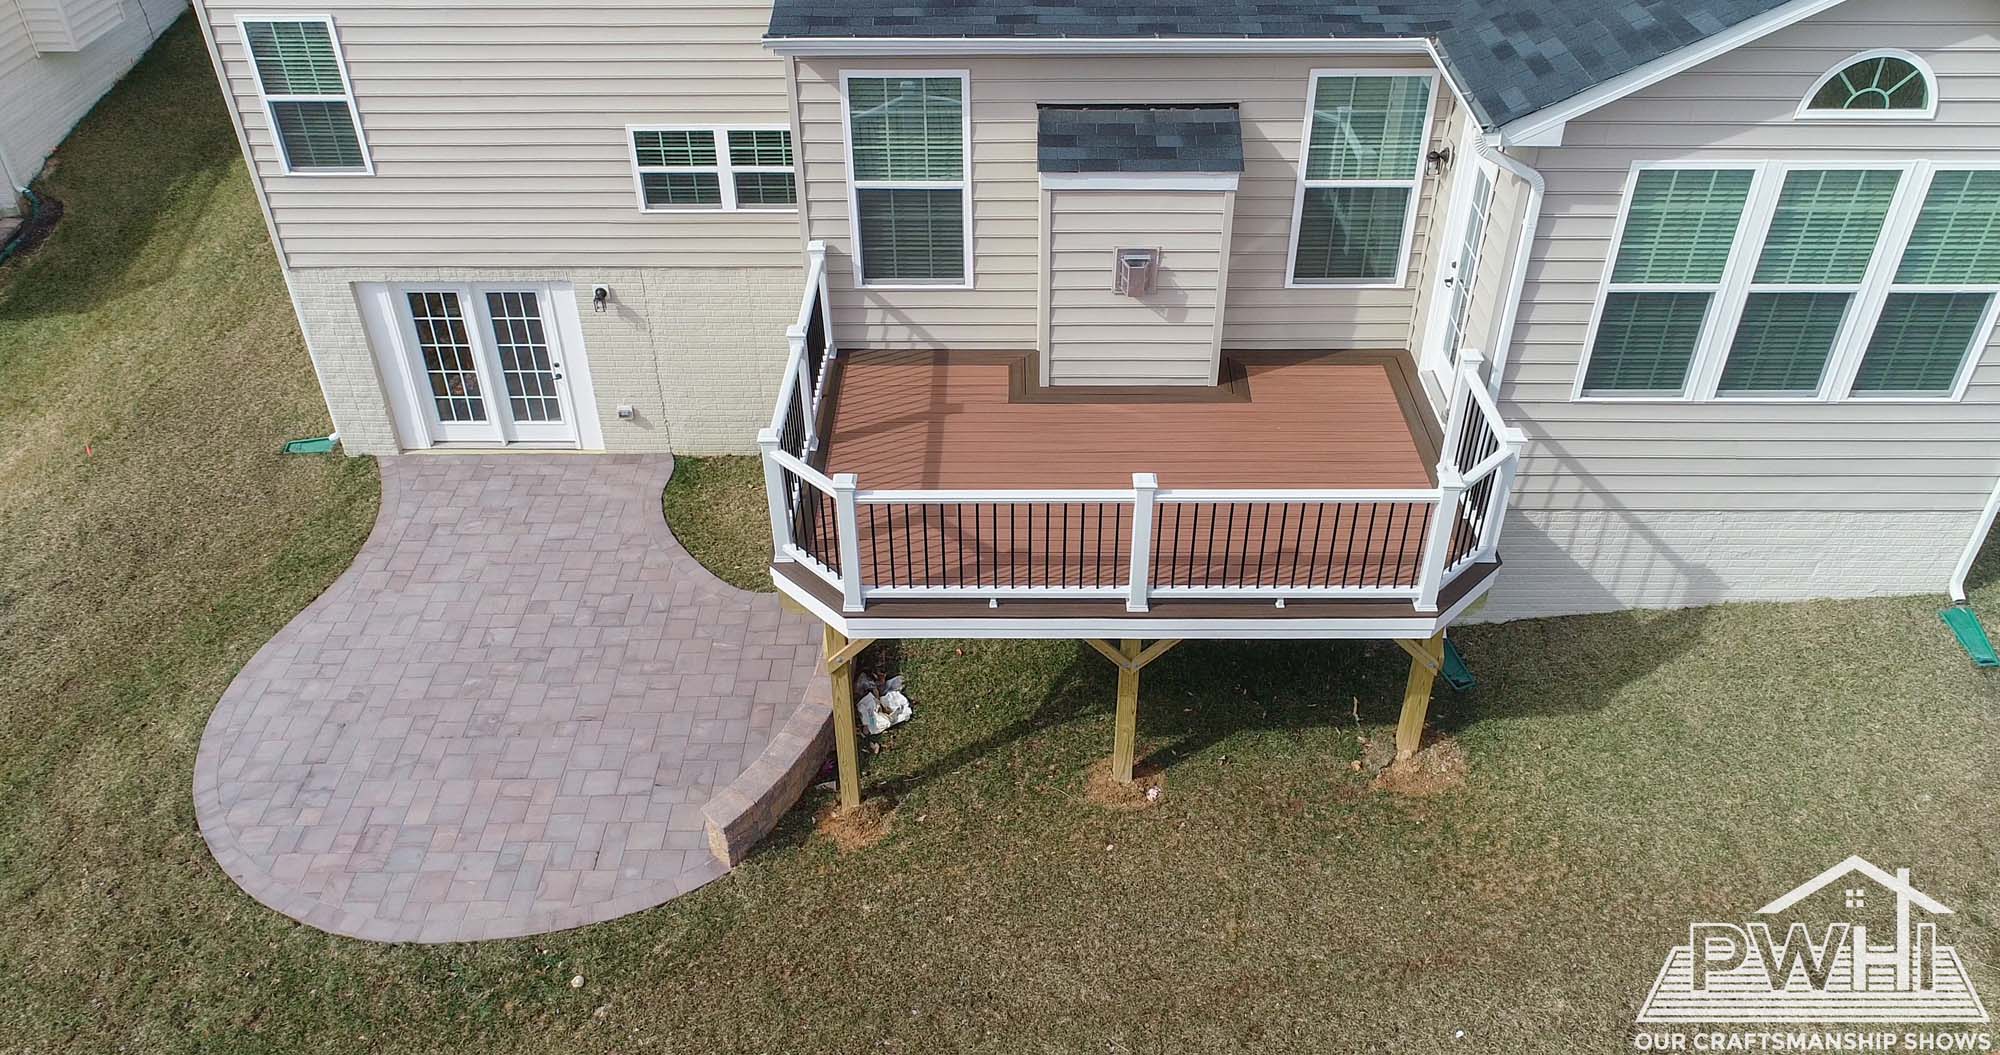 raised patio area in Virginia installed by PWHI